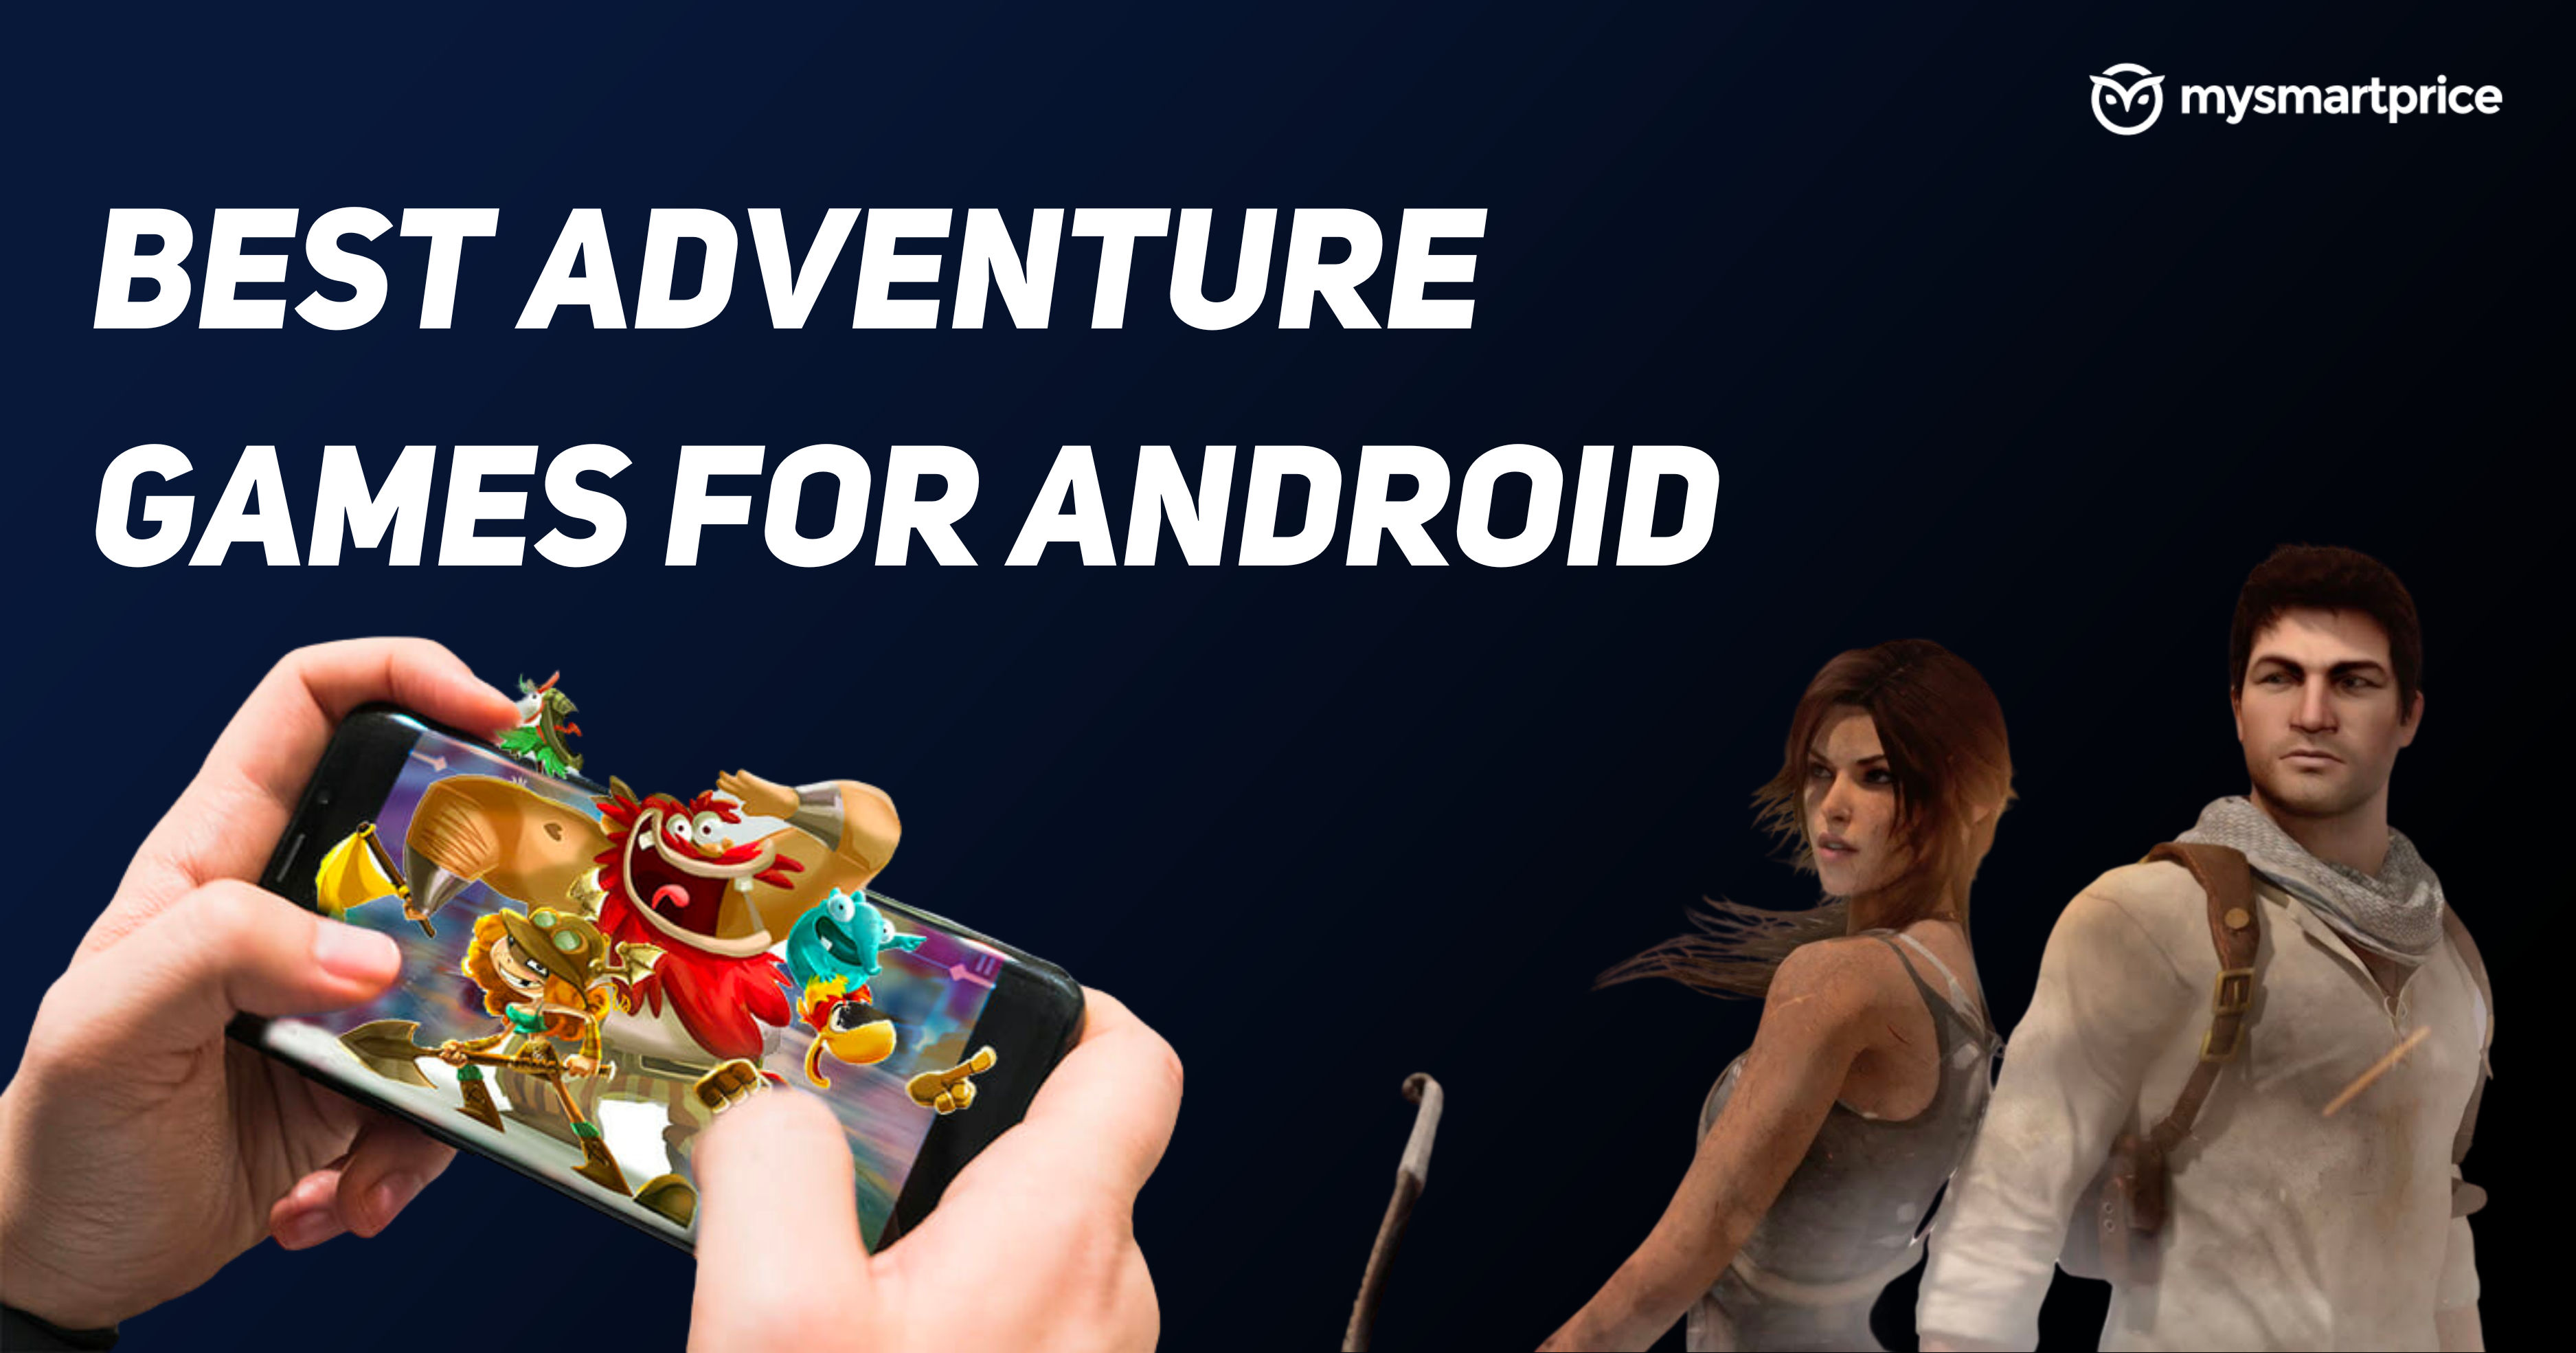 Top 10 Adventure Games for Android (FREE to Play) 2021